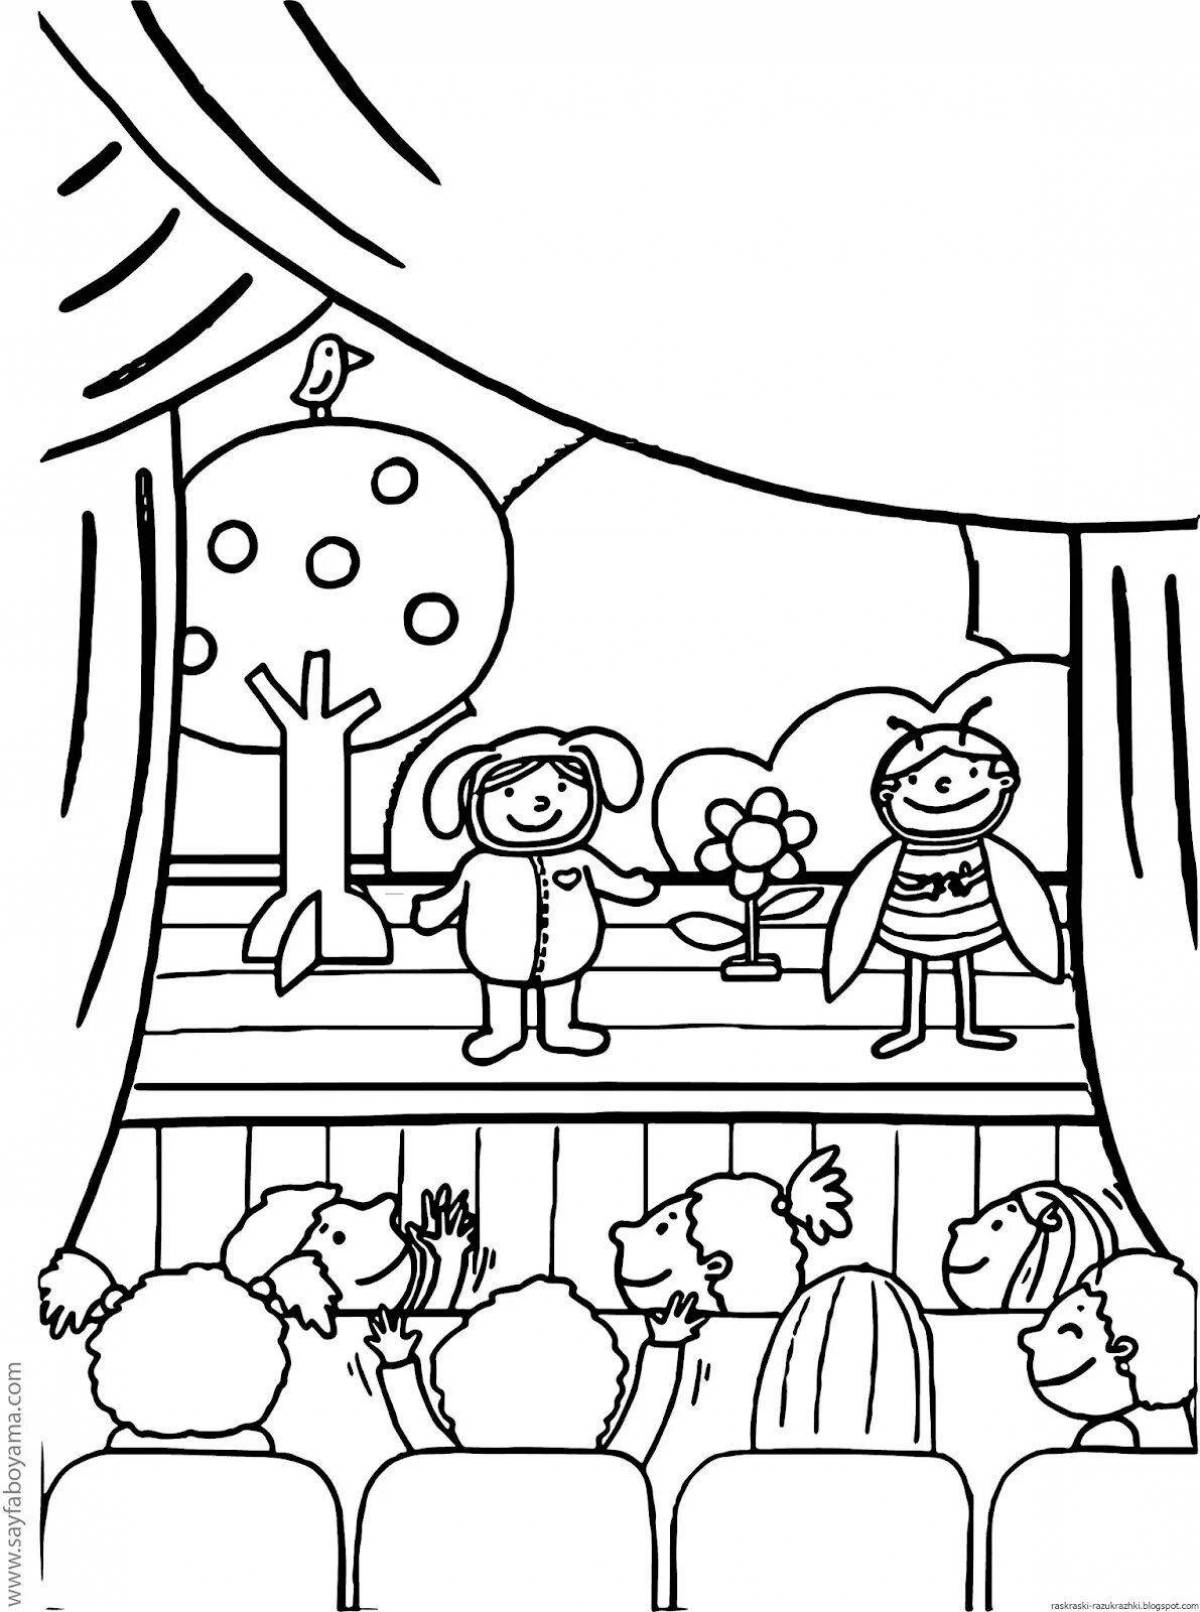 Festive theatrical coloring book for kids